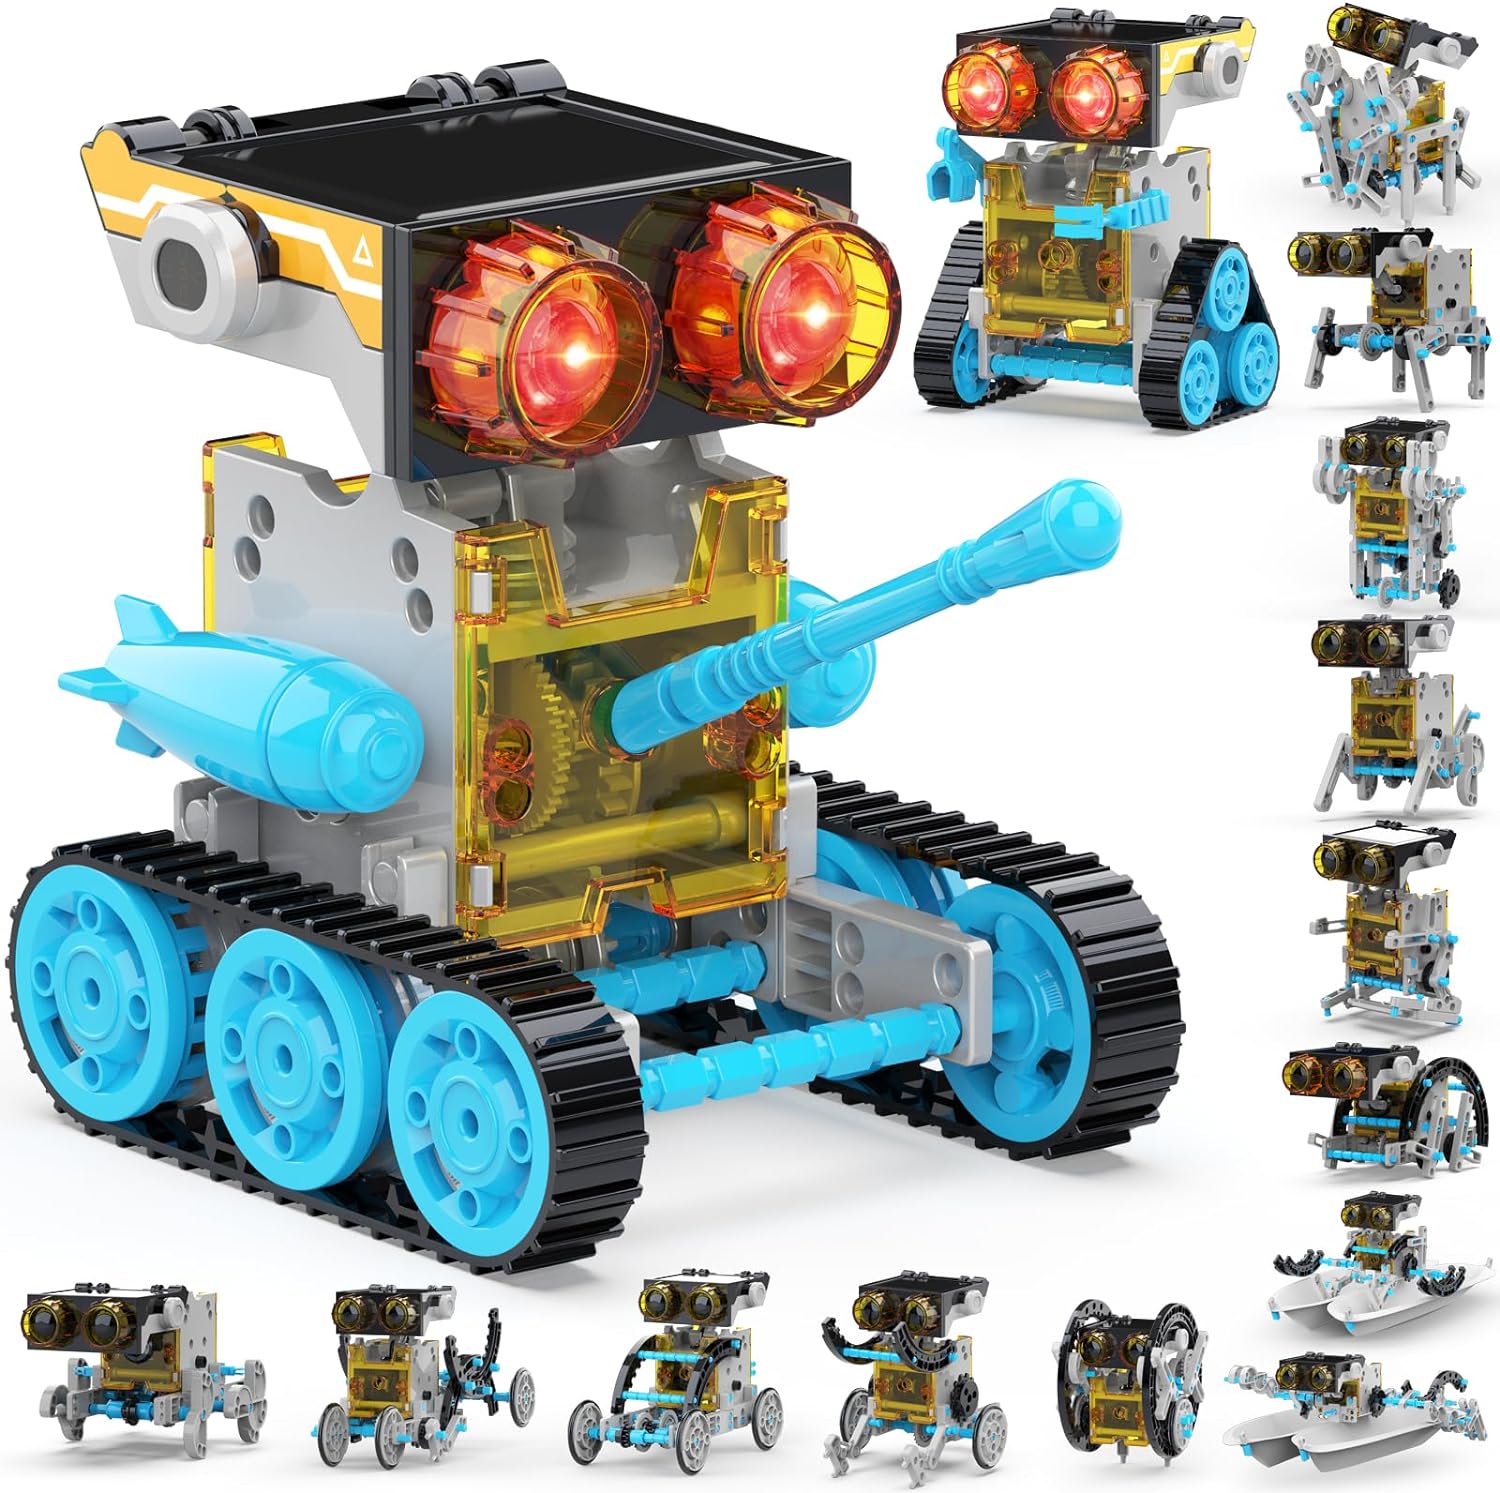 I ordered this for my daughter. She was given a small lego kit for her birthday and really liked it. So got her this because I thought she would like building and also seeing the robot go. And the fact that this has multiple robots she can build different things. It' allowing her to follow instructions and being very patient doing it. Using her hands and it' keeping her busy. Prefer it over screen time. She loves this. Great stem toy and good price.